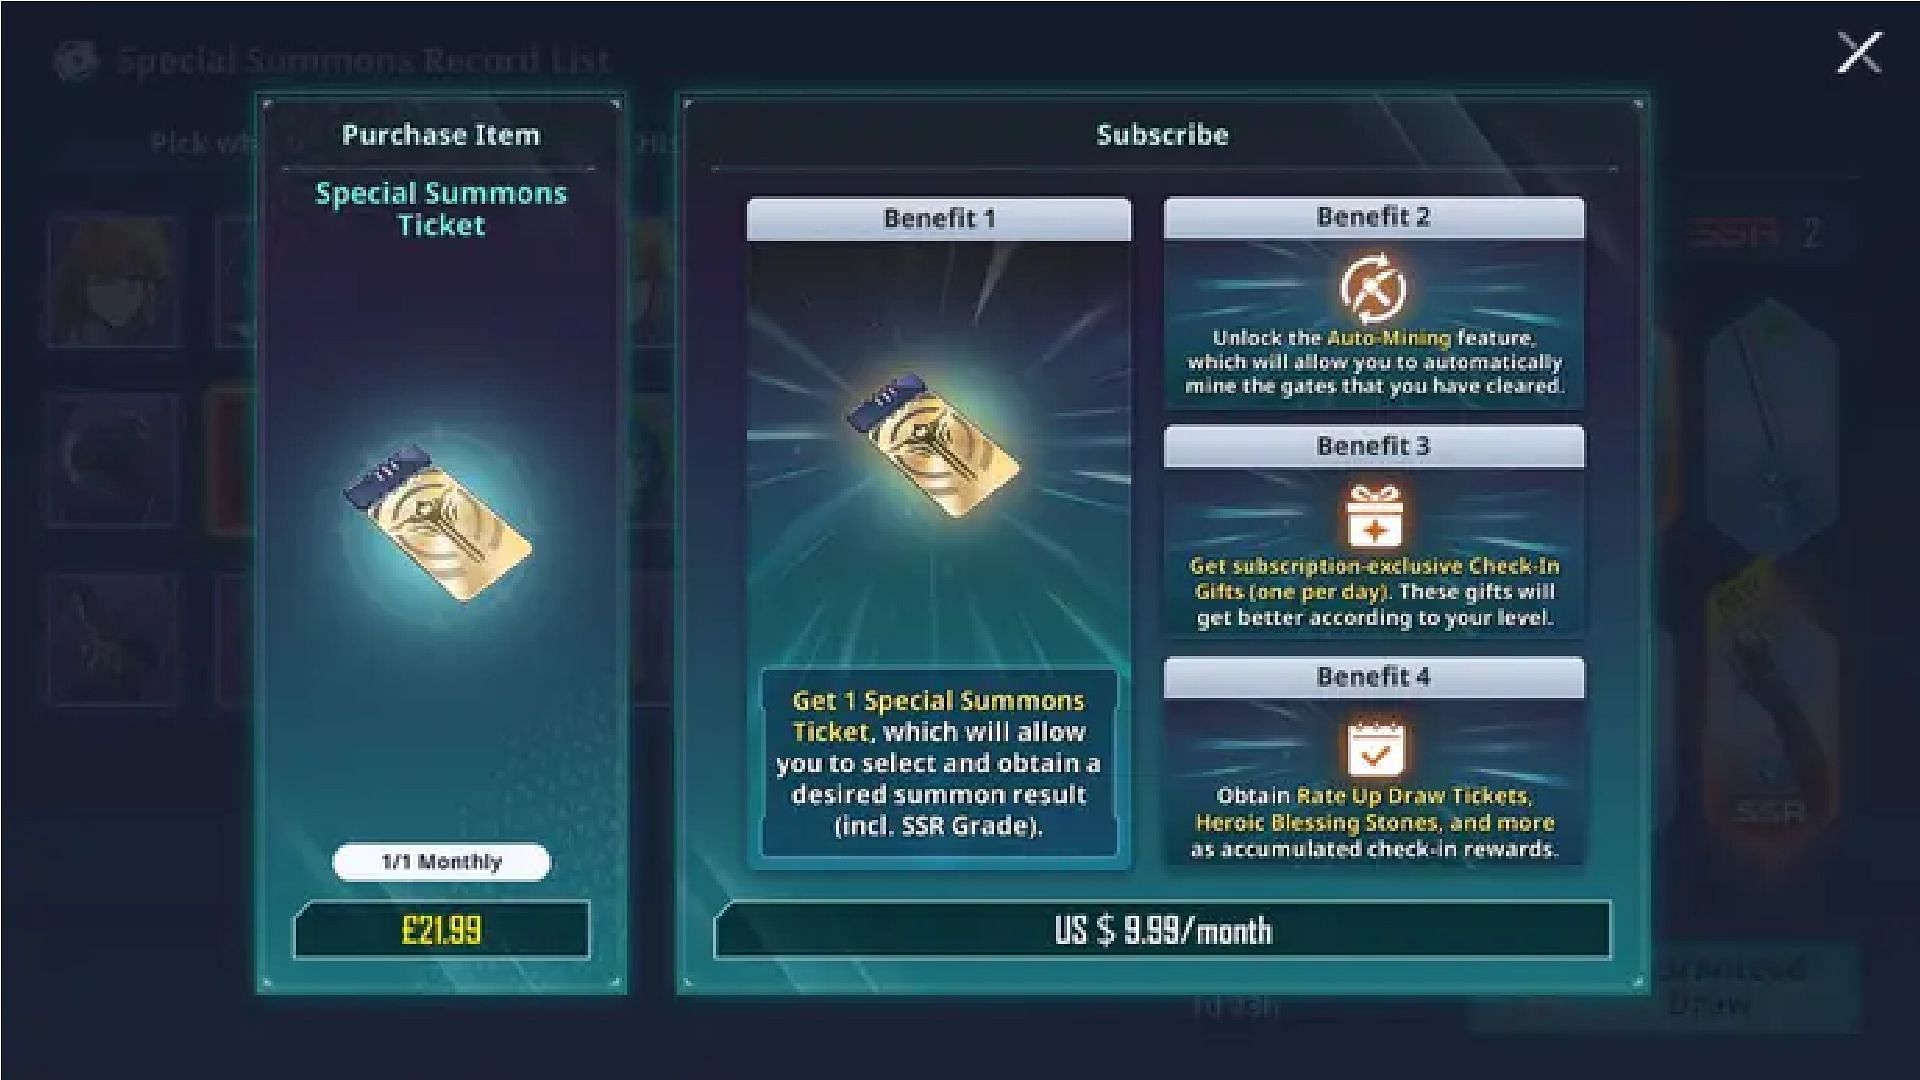 The cost of the Special Summon ticket and the Premium Subscription (Image via Netmarble)